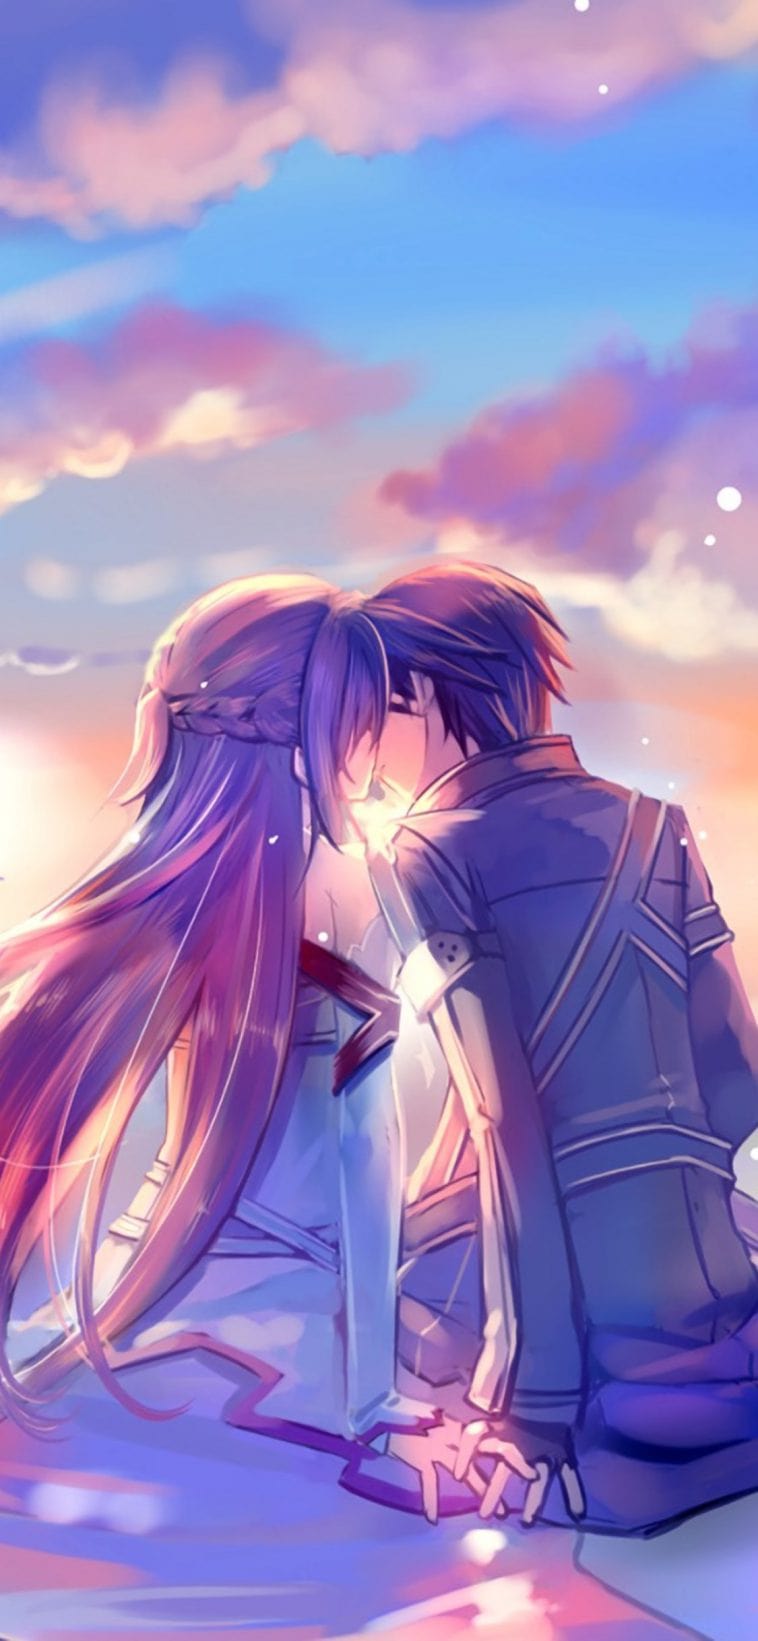 cute couple anime wallpaper for phone